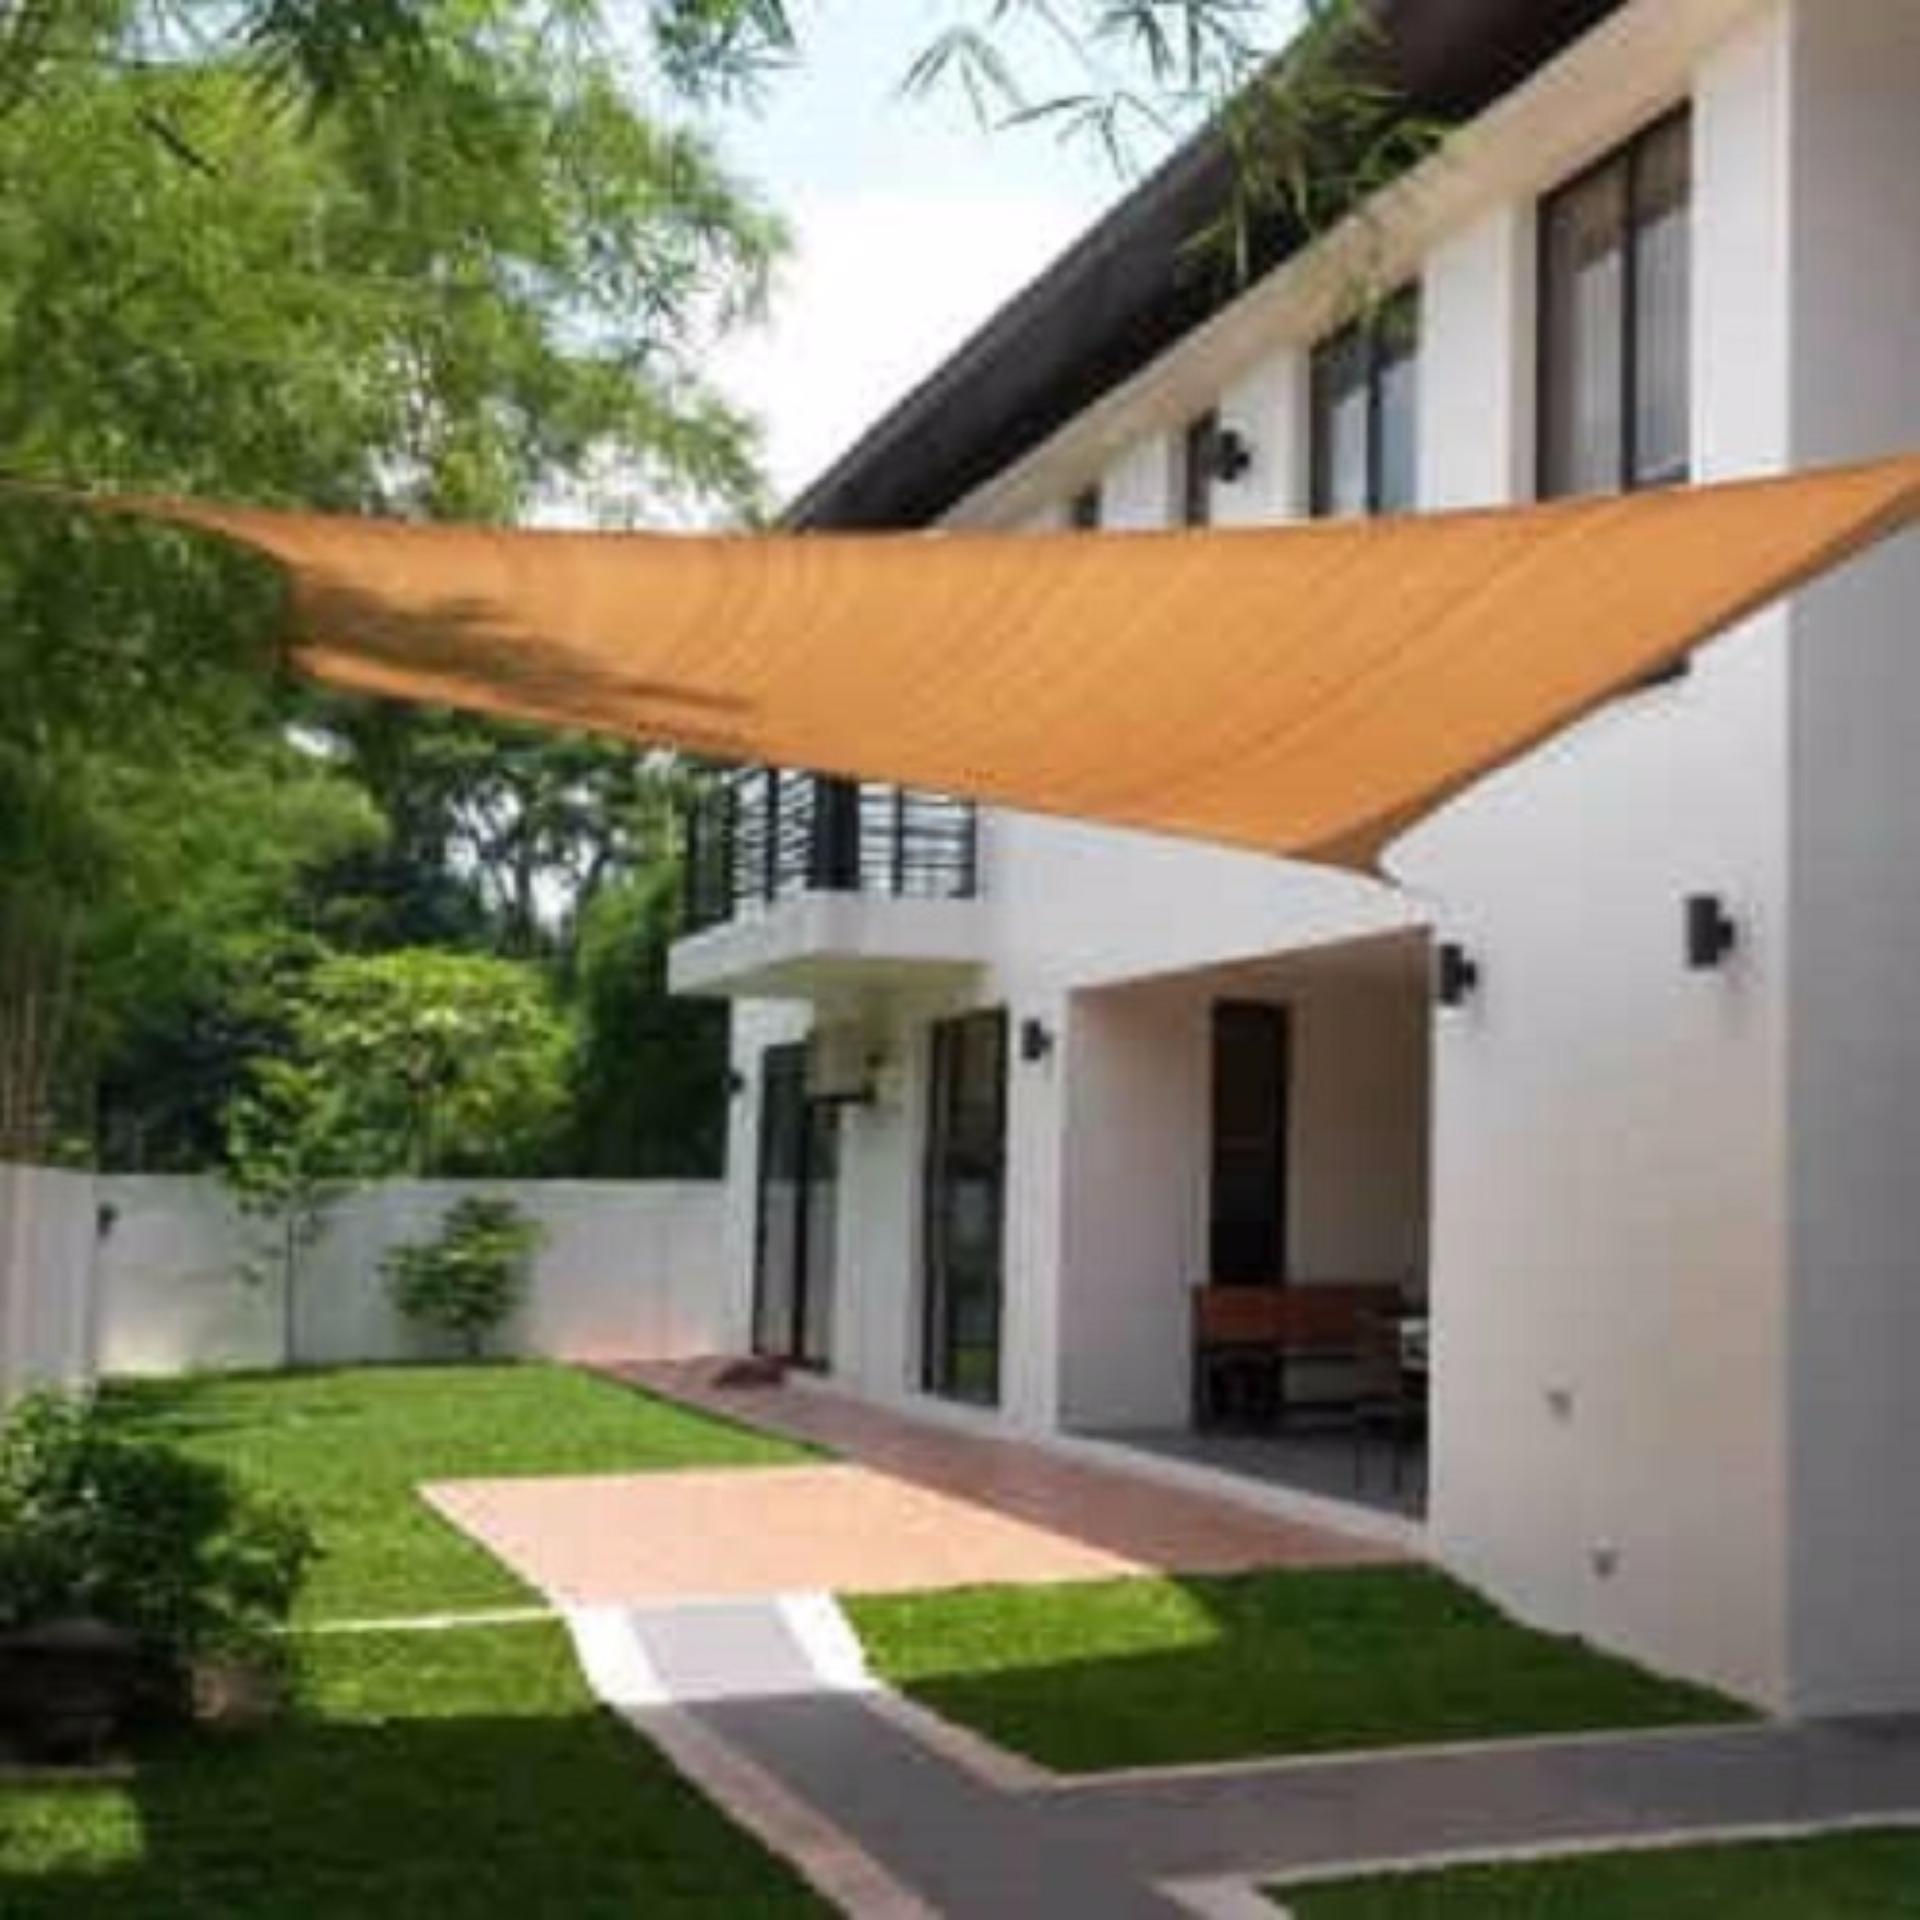 Details about   Waterproof Patio Sun Shade Sails Top Cover Awnings Rectangle Triangle Square 